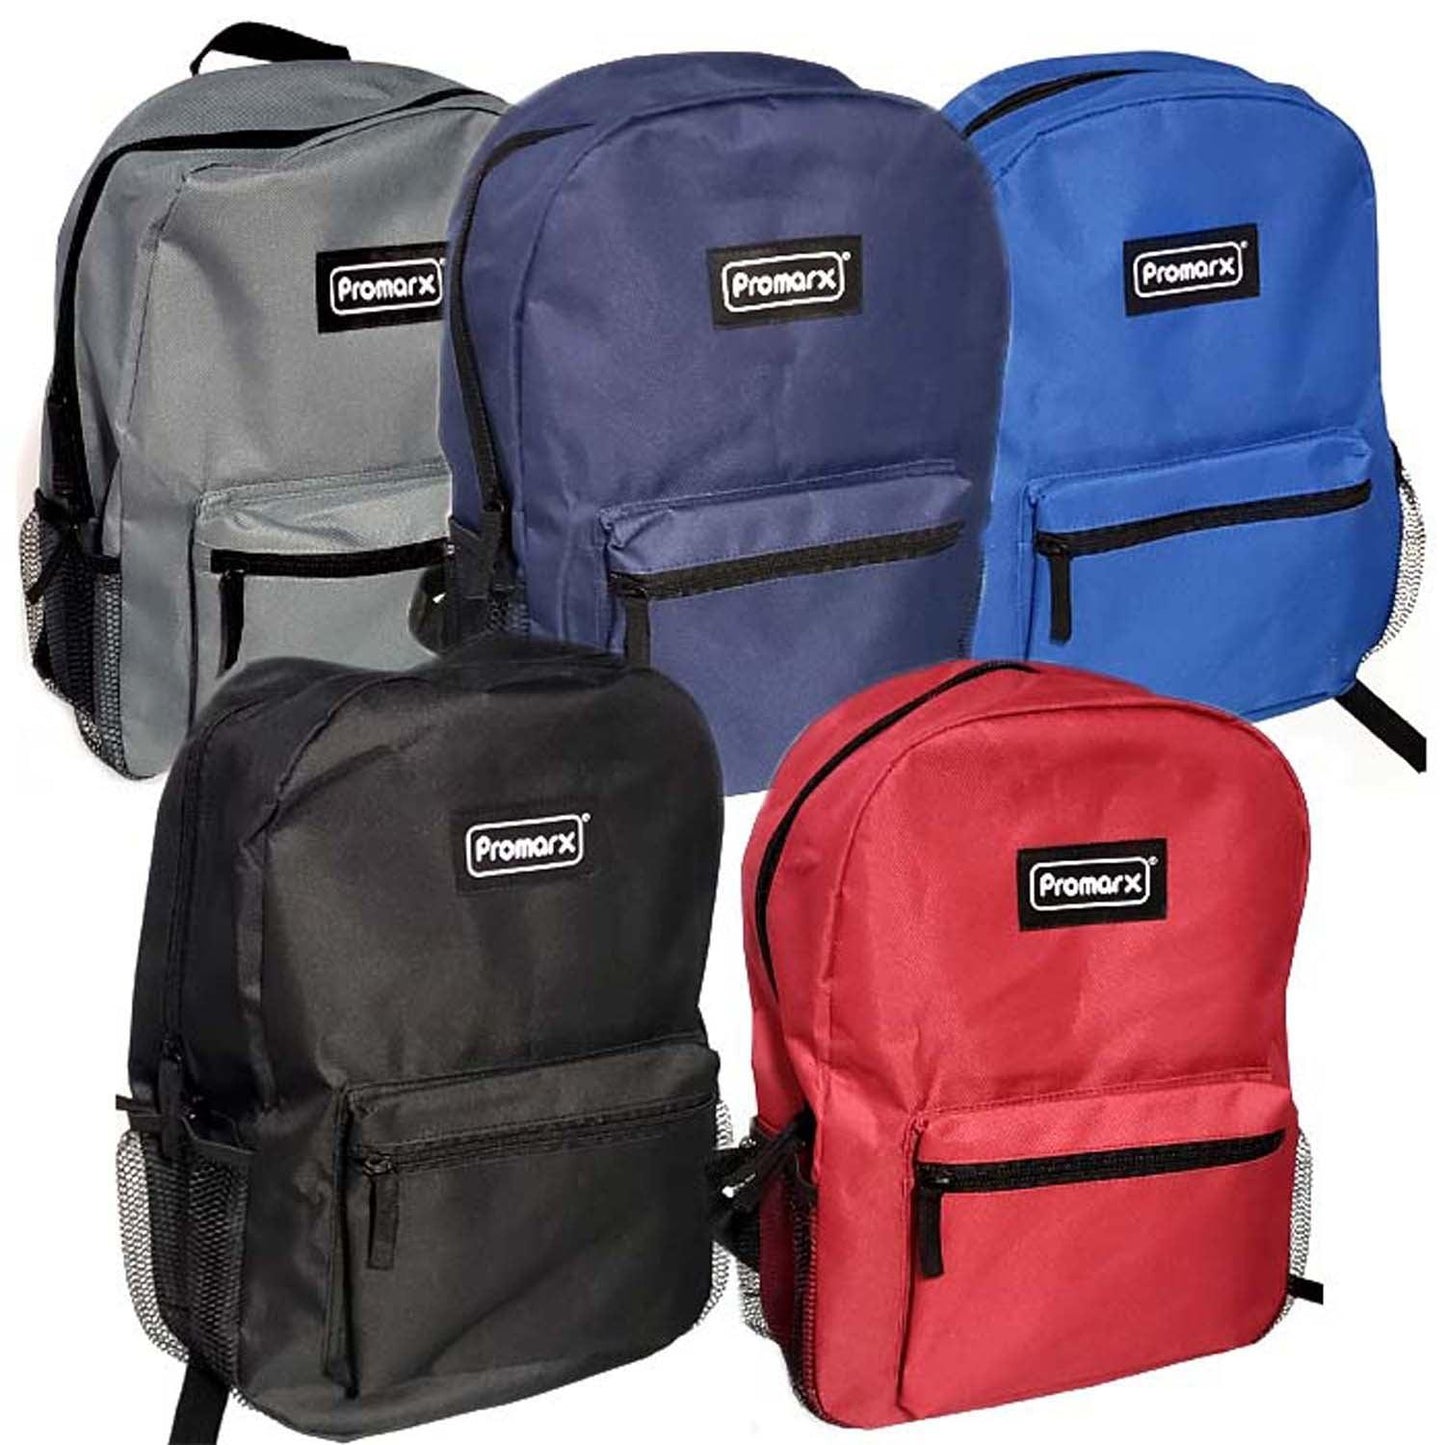 Back Pack, 16" with 2 Side Mesh Pockets, Assorted Colors, Pack of 2 - Loomini